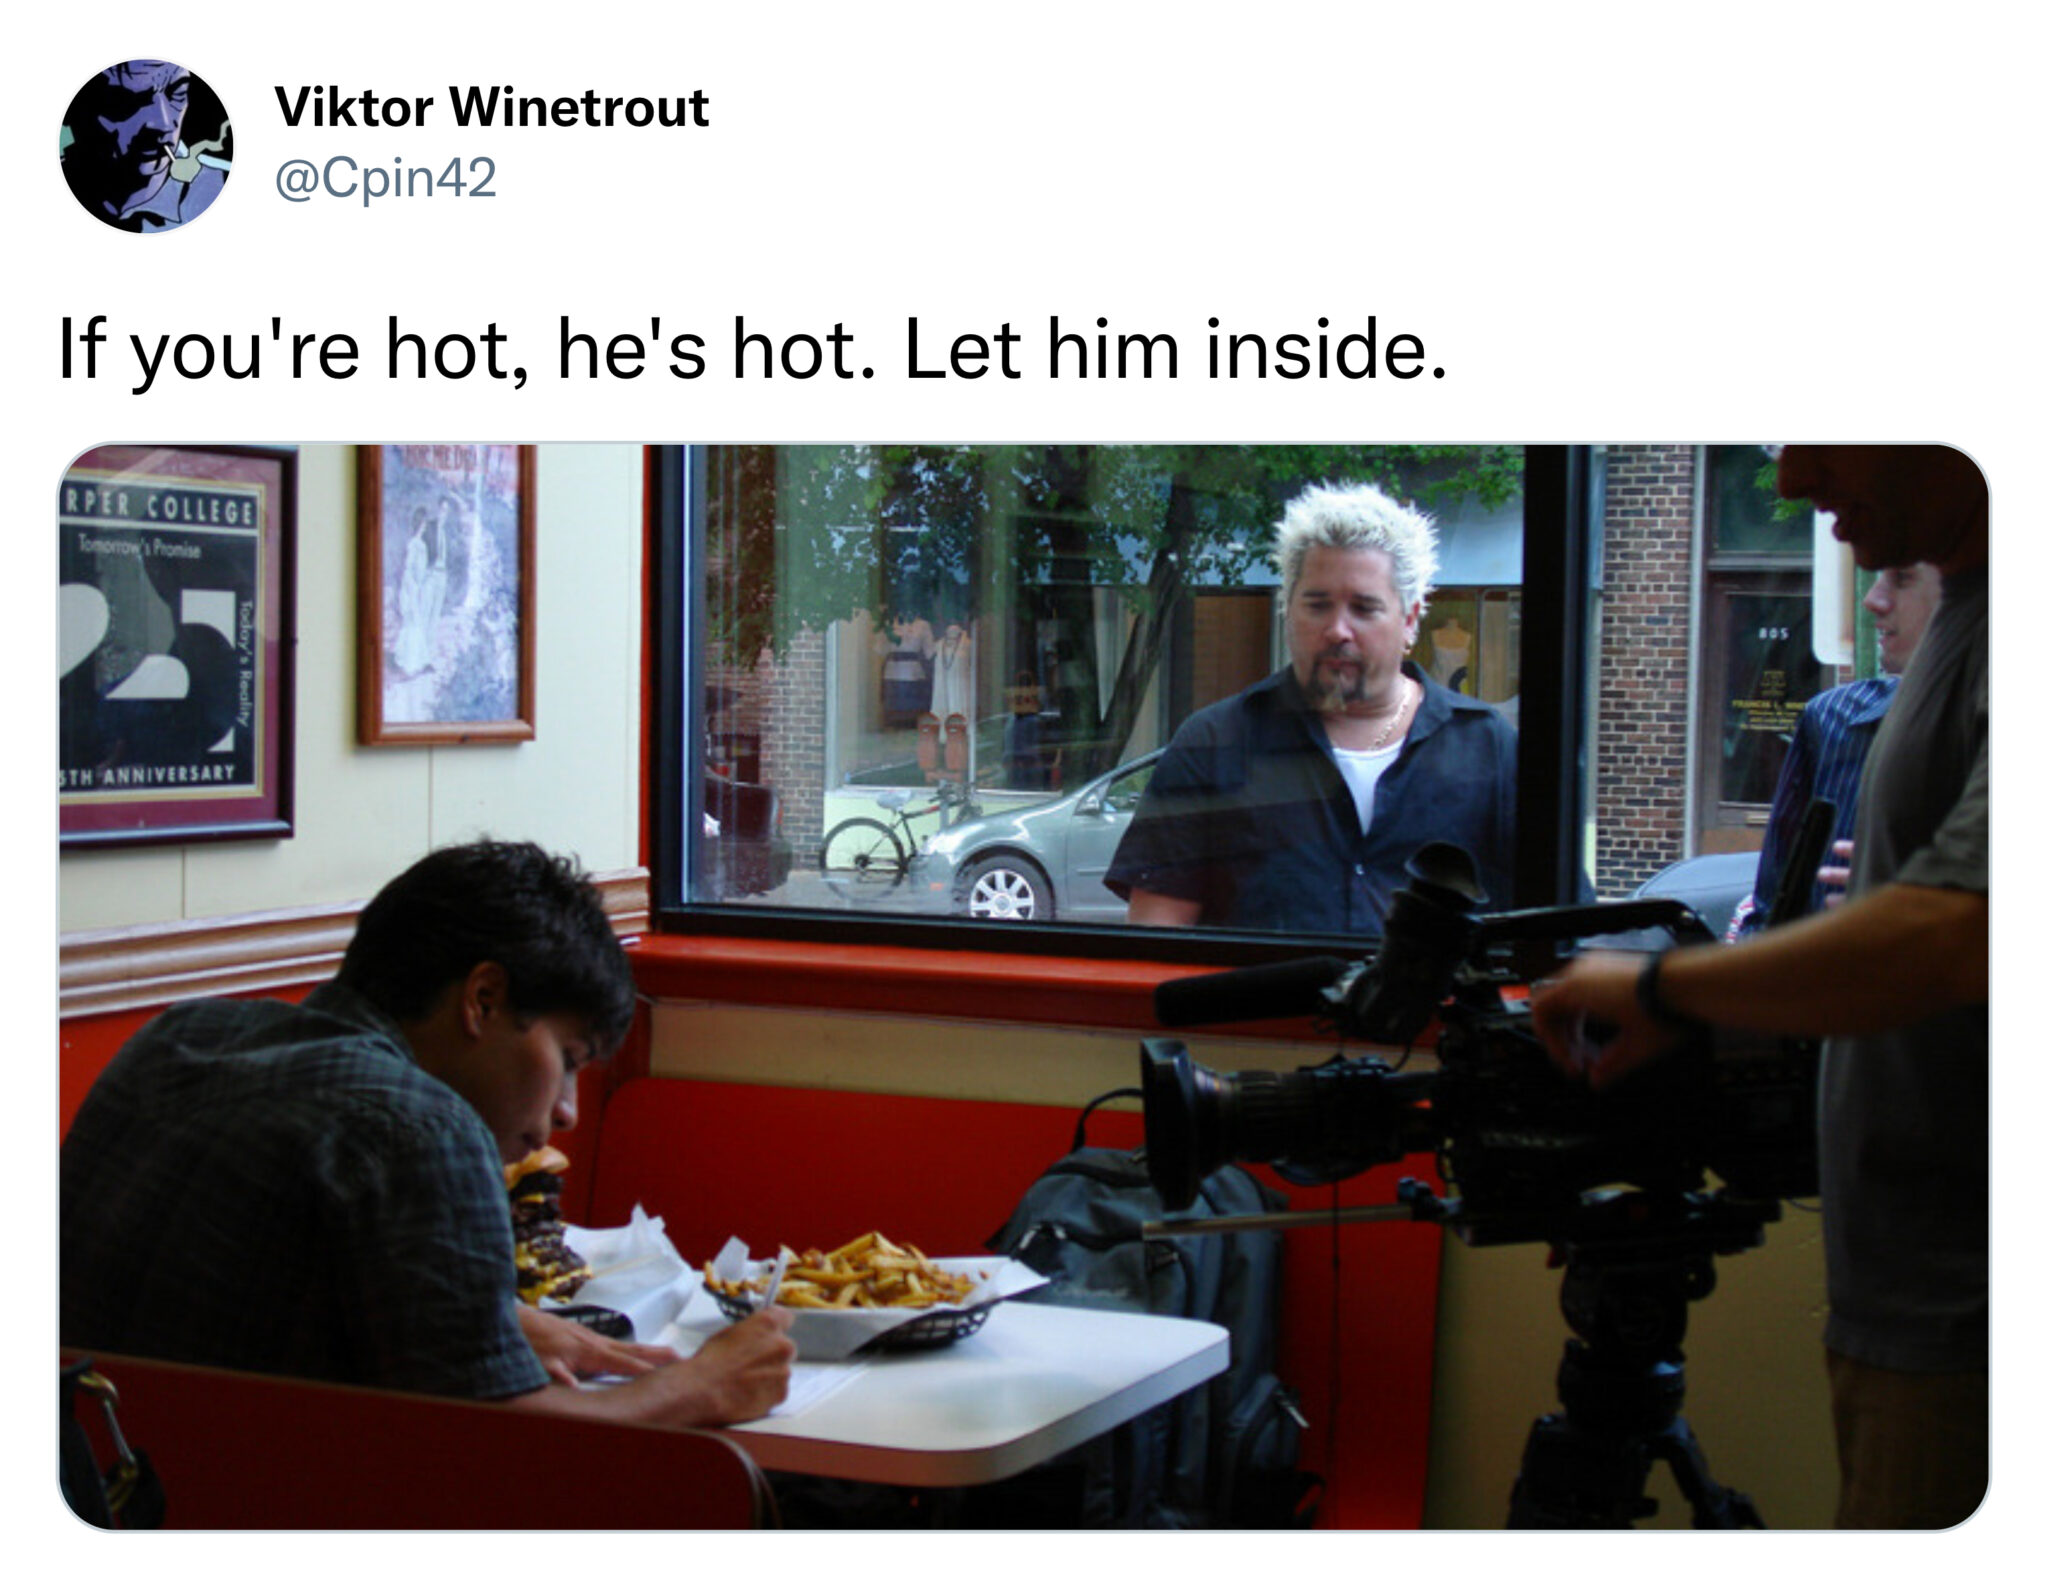 funny tweets and posts on twitter -  guy fieri looking in window - Viktor Winetrout If you're hot, he's hot. Let him inside. Rper College Tomorrow's Promise Sth Anniversary Bos